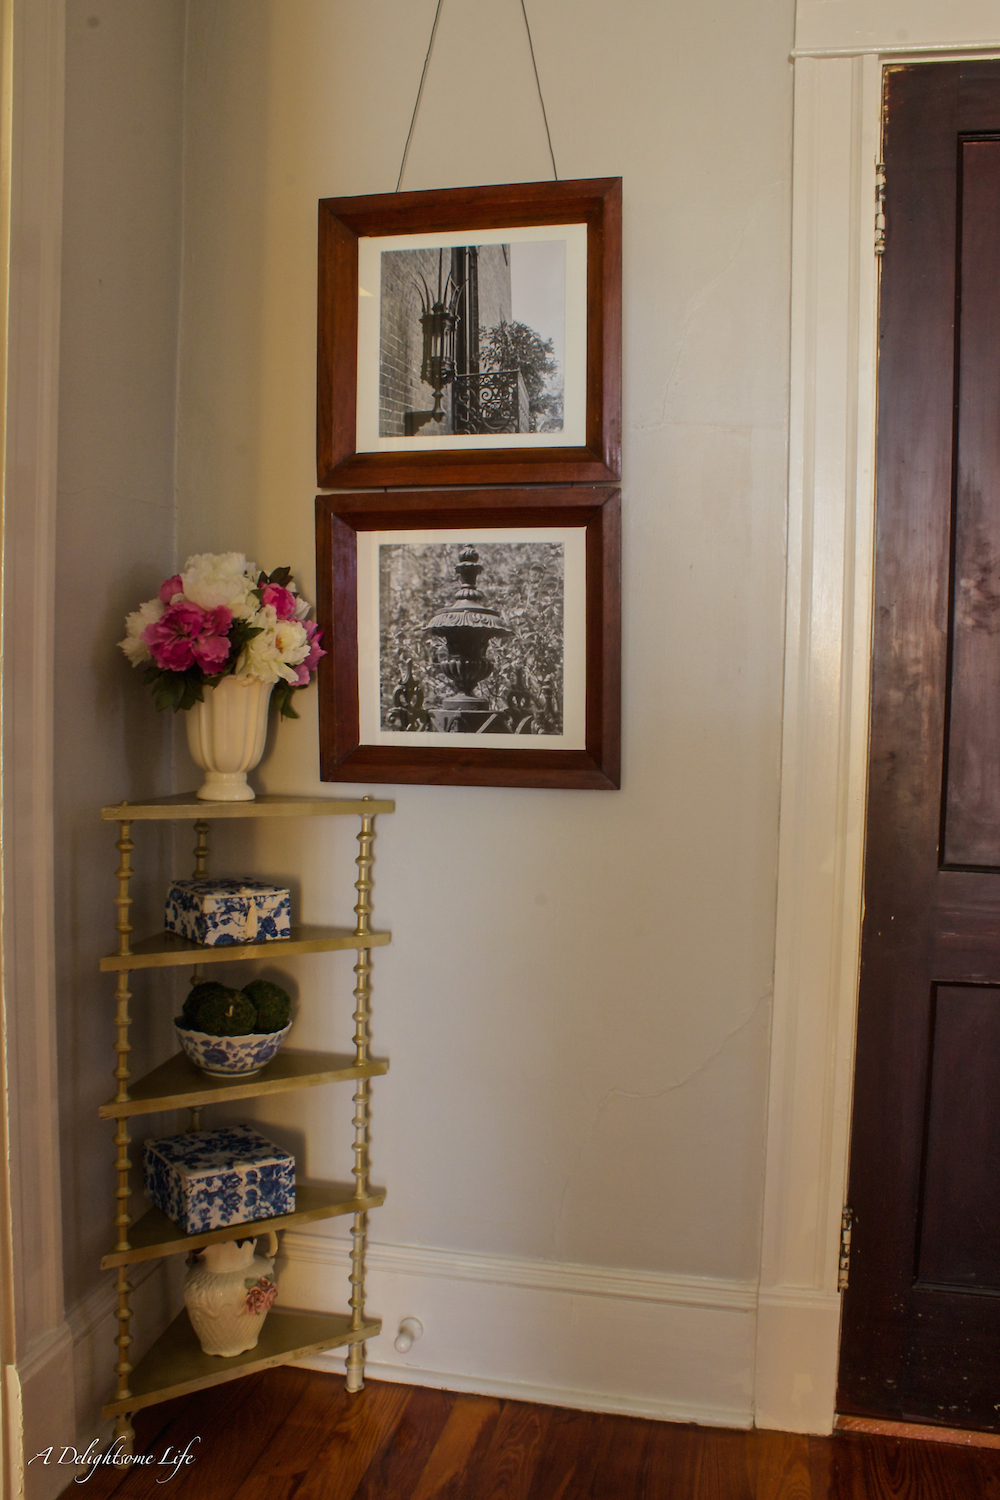 Painting the walls in the upper hallway led to changing the decor including painting this small shelf